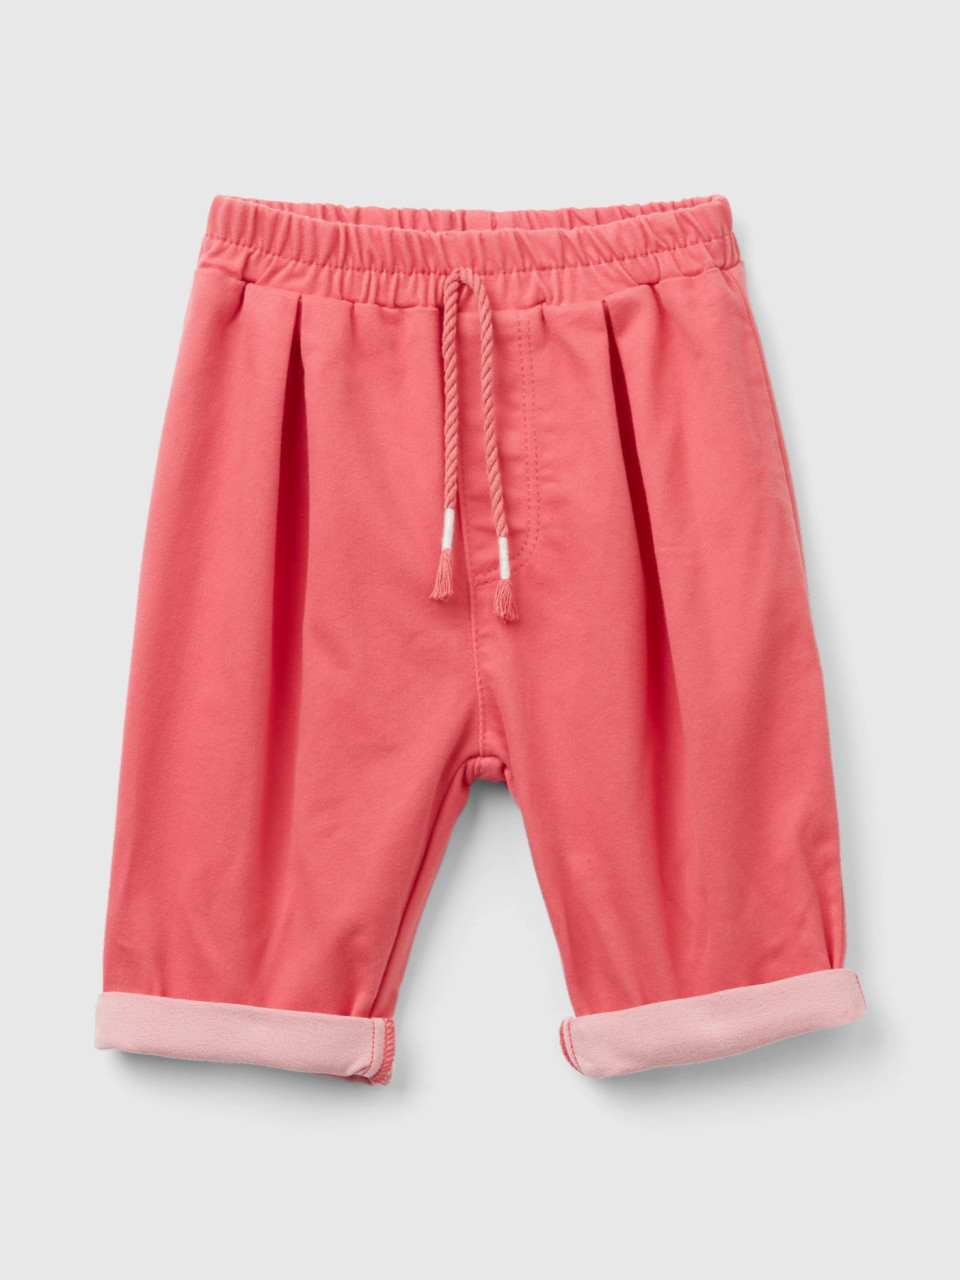 Benetton, Super Stretch Trousers With Drawstring, Salmon, Kids